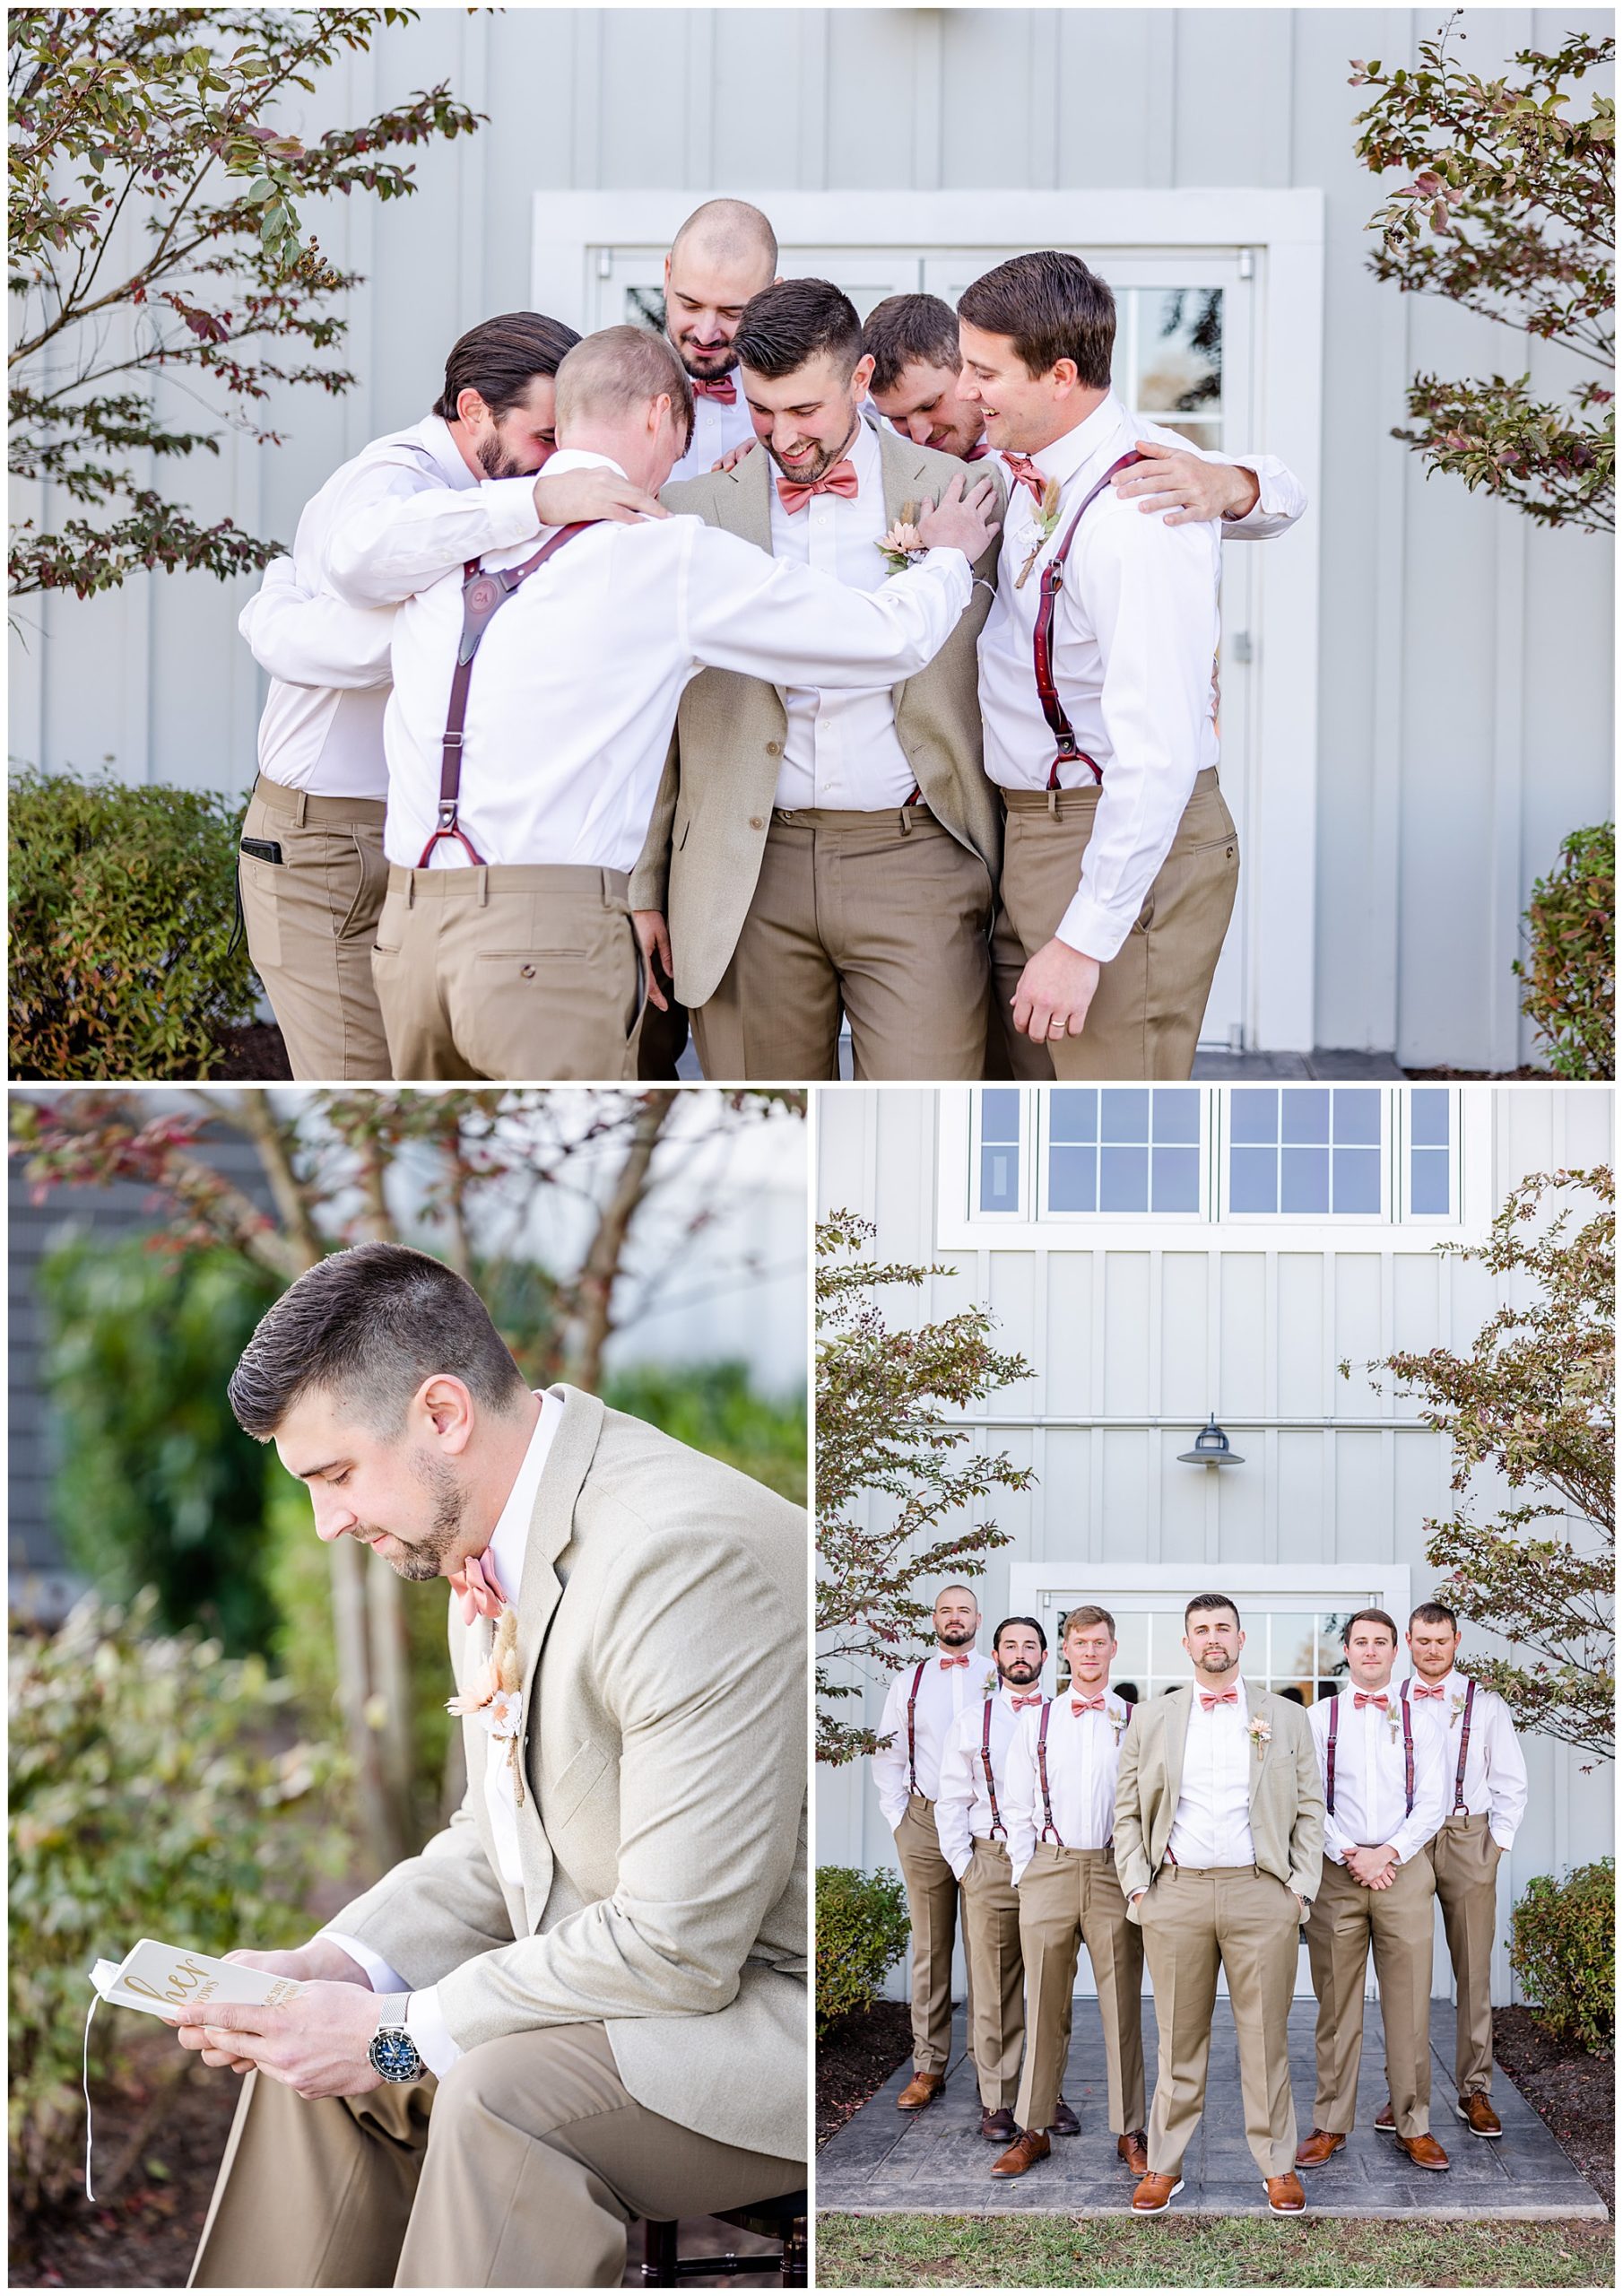 fall colors Middleburg Virginia wedding, Middleburg wedding, Middleburg wedding photographer, Loudoun County wedding photographer, northern Virginia wedding photographer, Middleburg Barn wedding, autumn wedding aesthetic, barn wedding aesthetic, elegant barn wedding, DC wedding photographer, Rachel E.H. Photography, groomsmen huddling around groom, groom reading vows booklet, groom and groomsmen standing in triangle